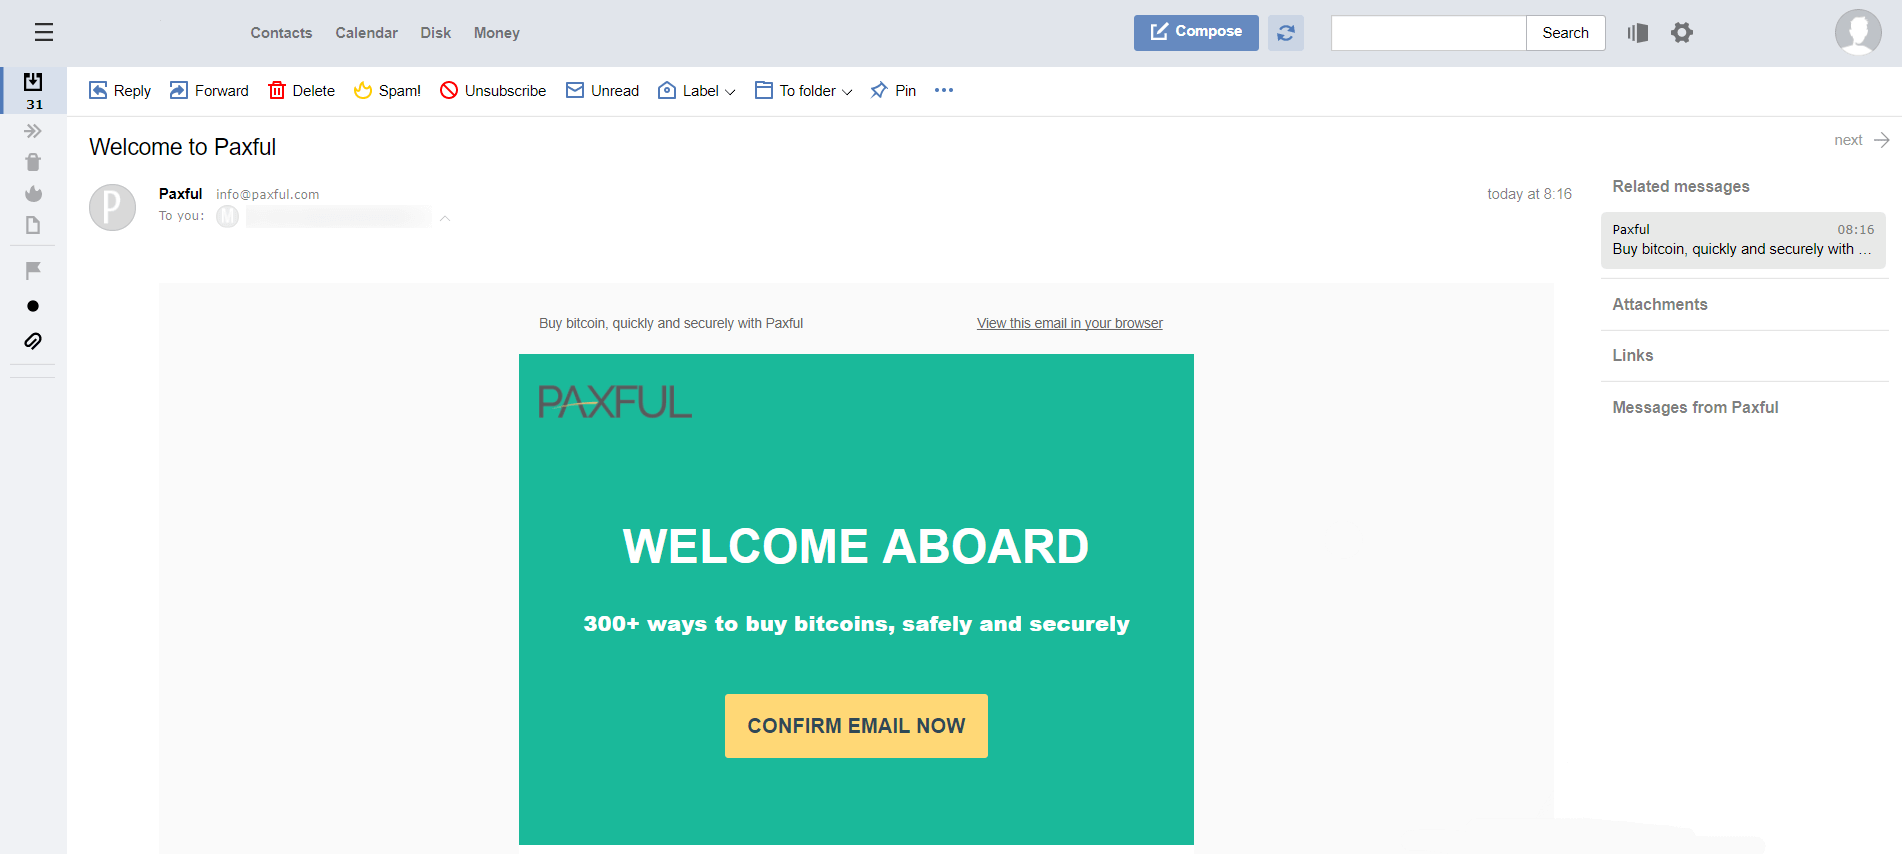 How to check my bitcoin wallet address on paxful